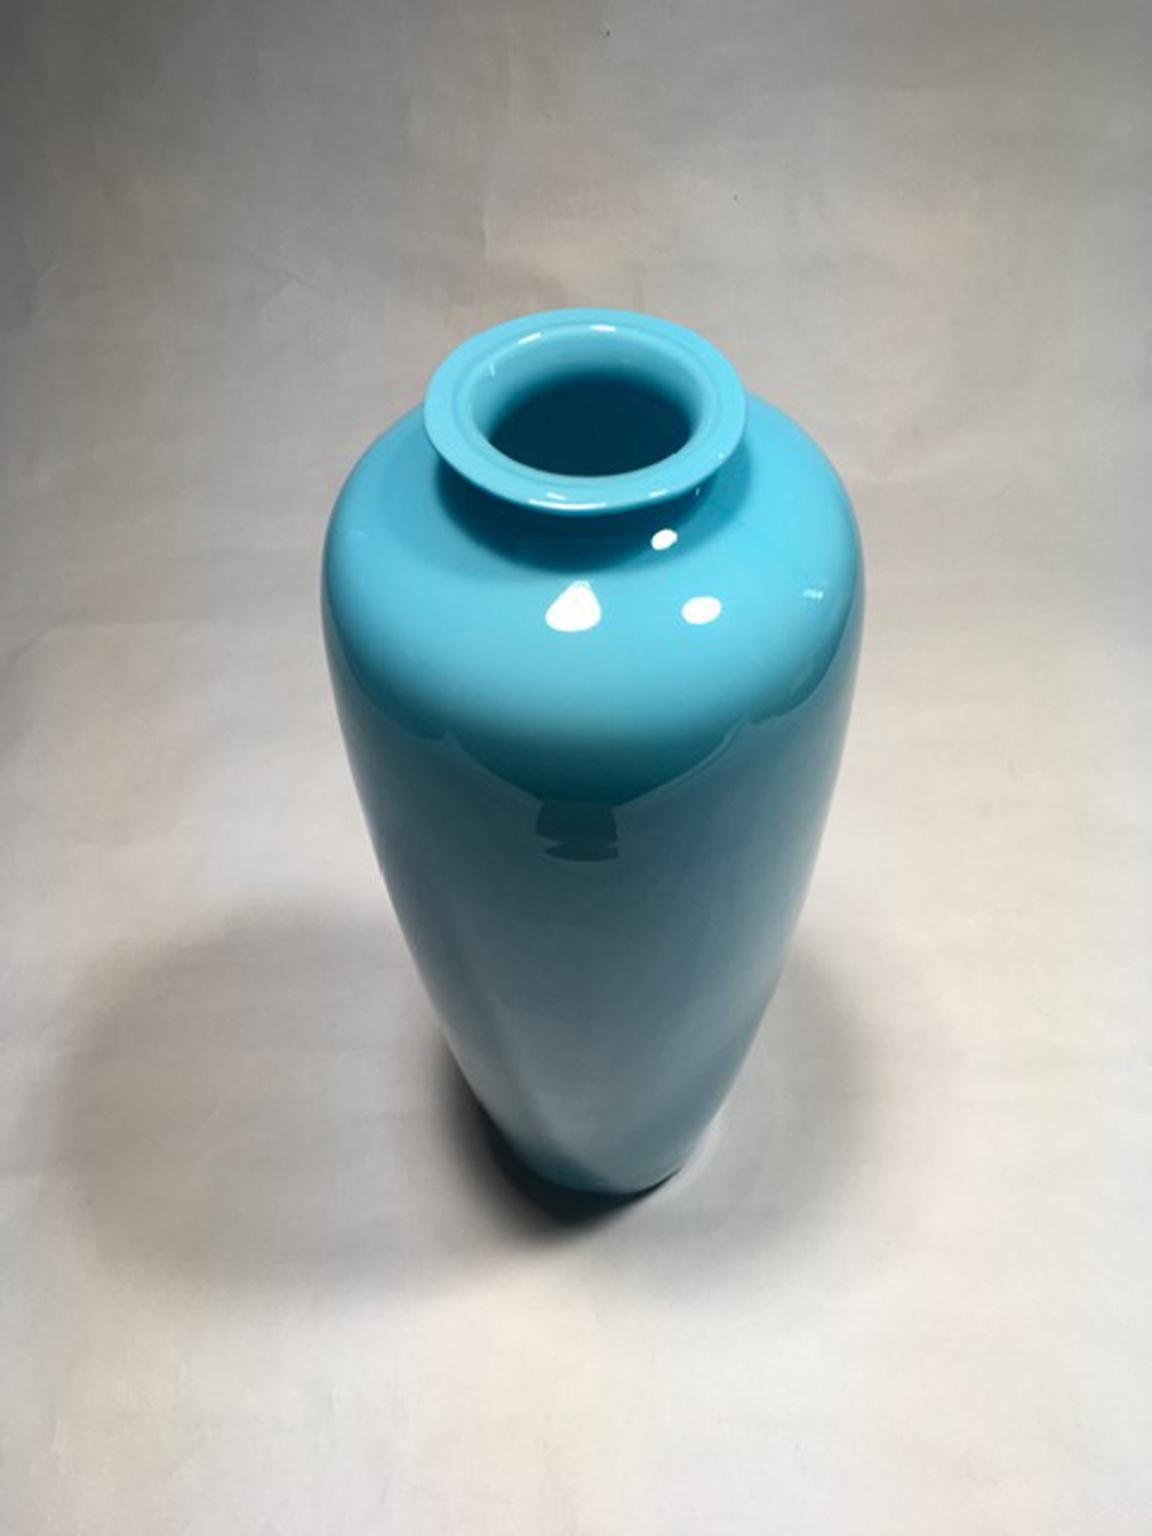 This Post-Modern Murano glass vase has a very elegant and delicate light blue tone.
Becouse it’s not industrial production, the vase shows some little irregularities in the form.